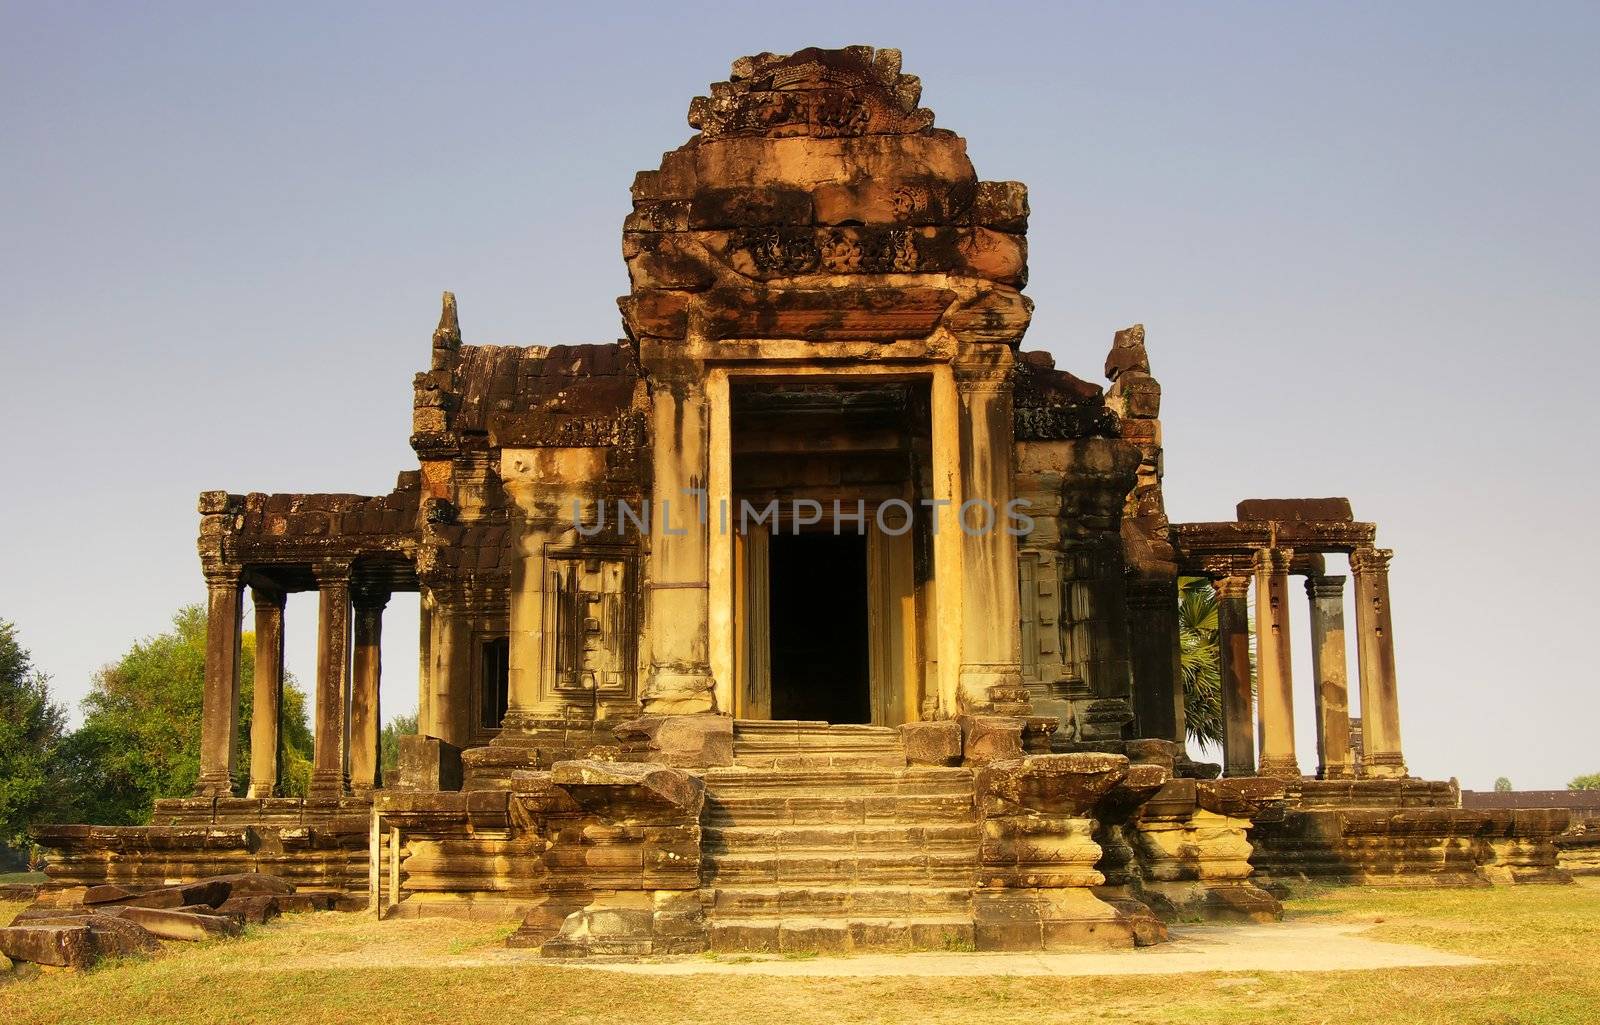 One of the outer buildings at the main temple complex of Angkor Wat. Siem Reap, Cambodia
